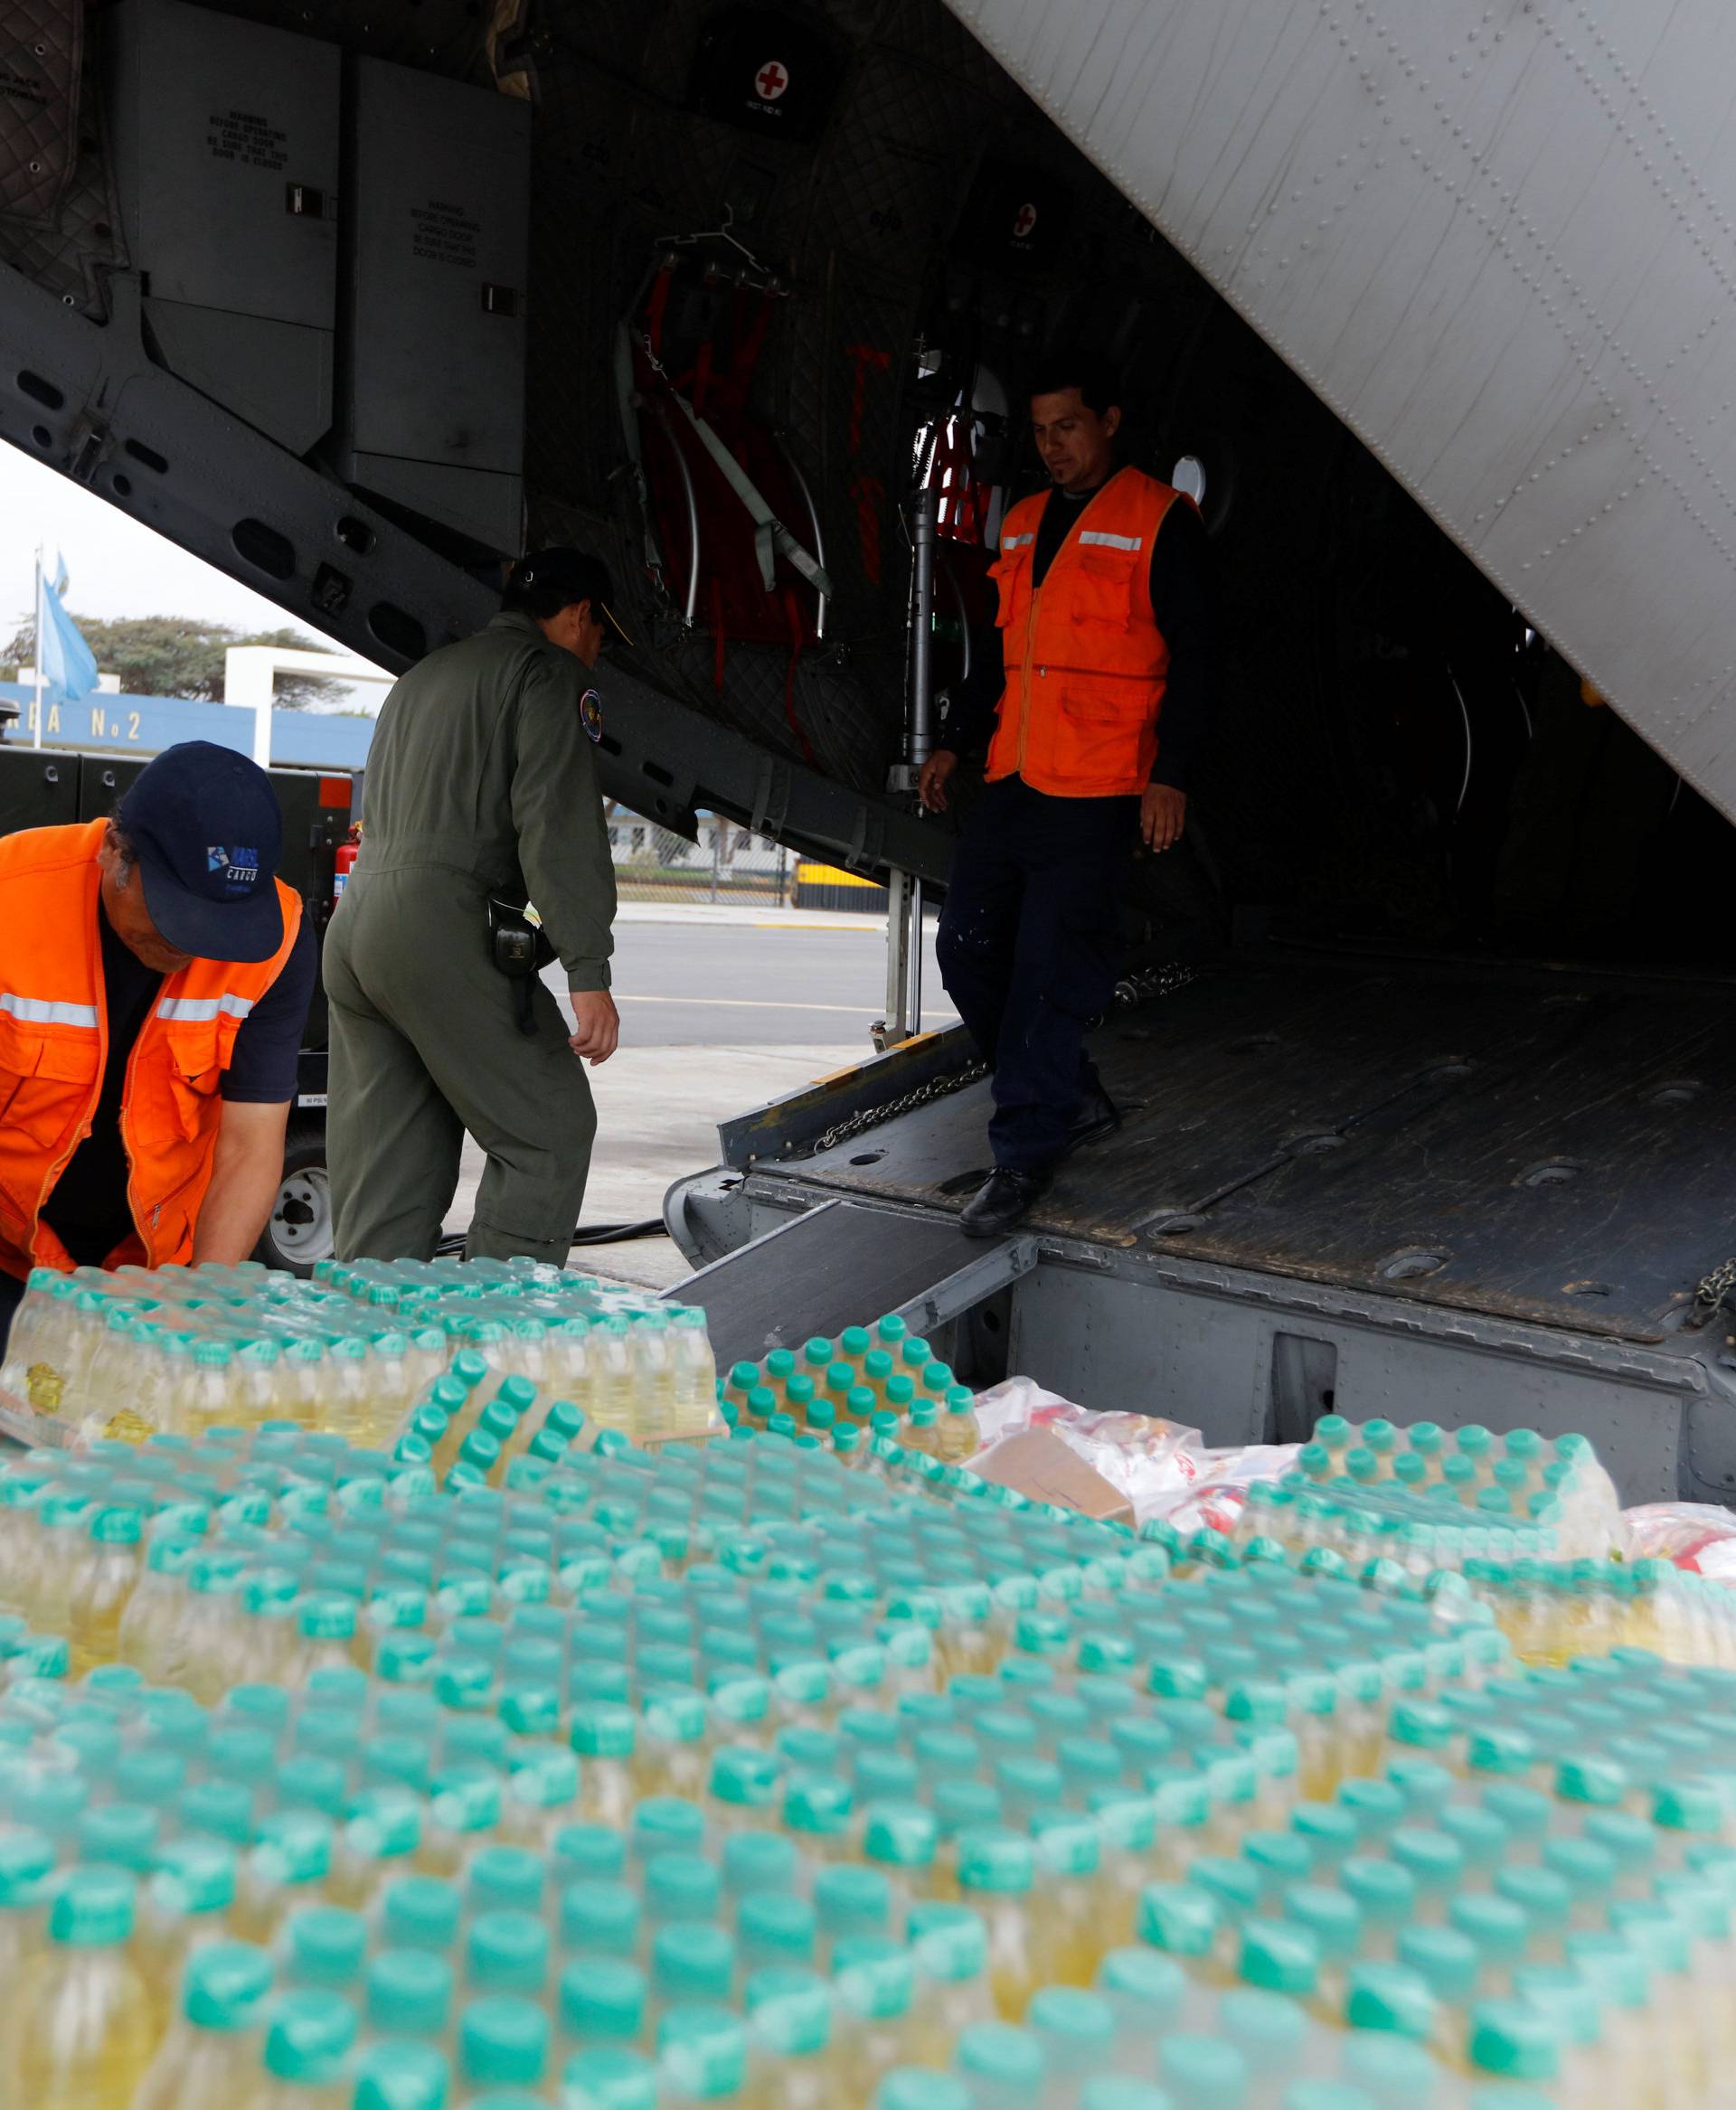 Members of Peru's National Institute of Civil Defense and Peru's Air Force load a cargo plane with aid to be delivered to the Caylloma province of the Andean region Arequipa after a 5.3 magnitude shallow earthquake rocked the region, in Lima